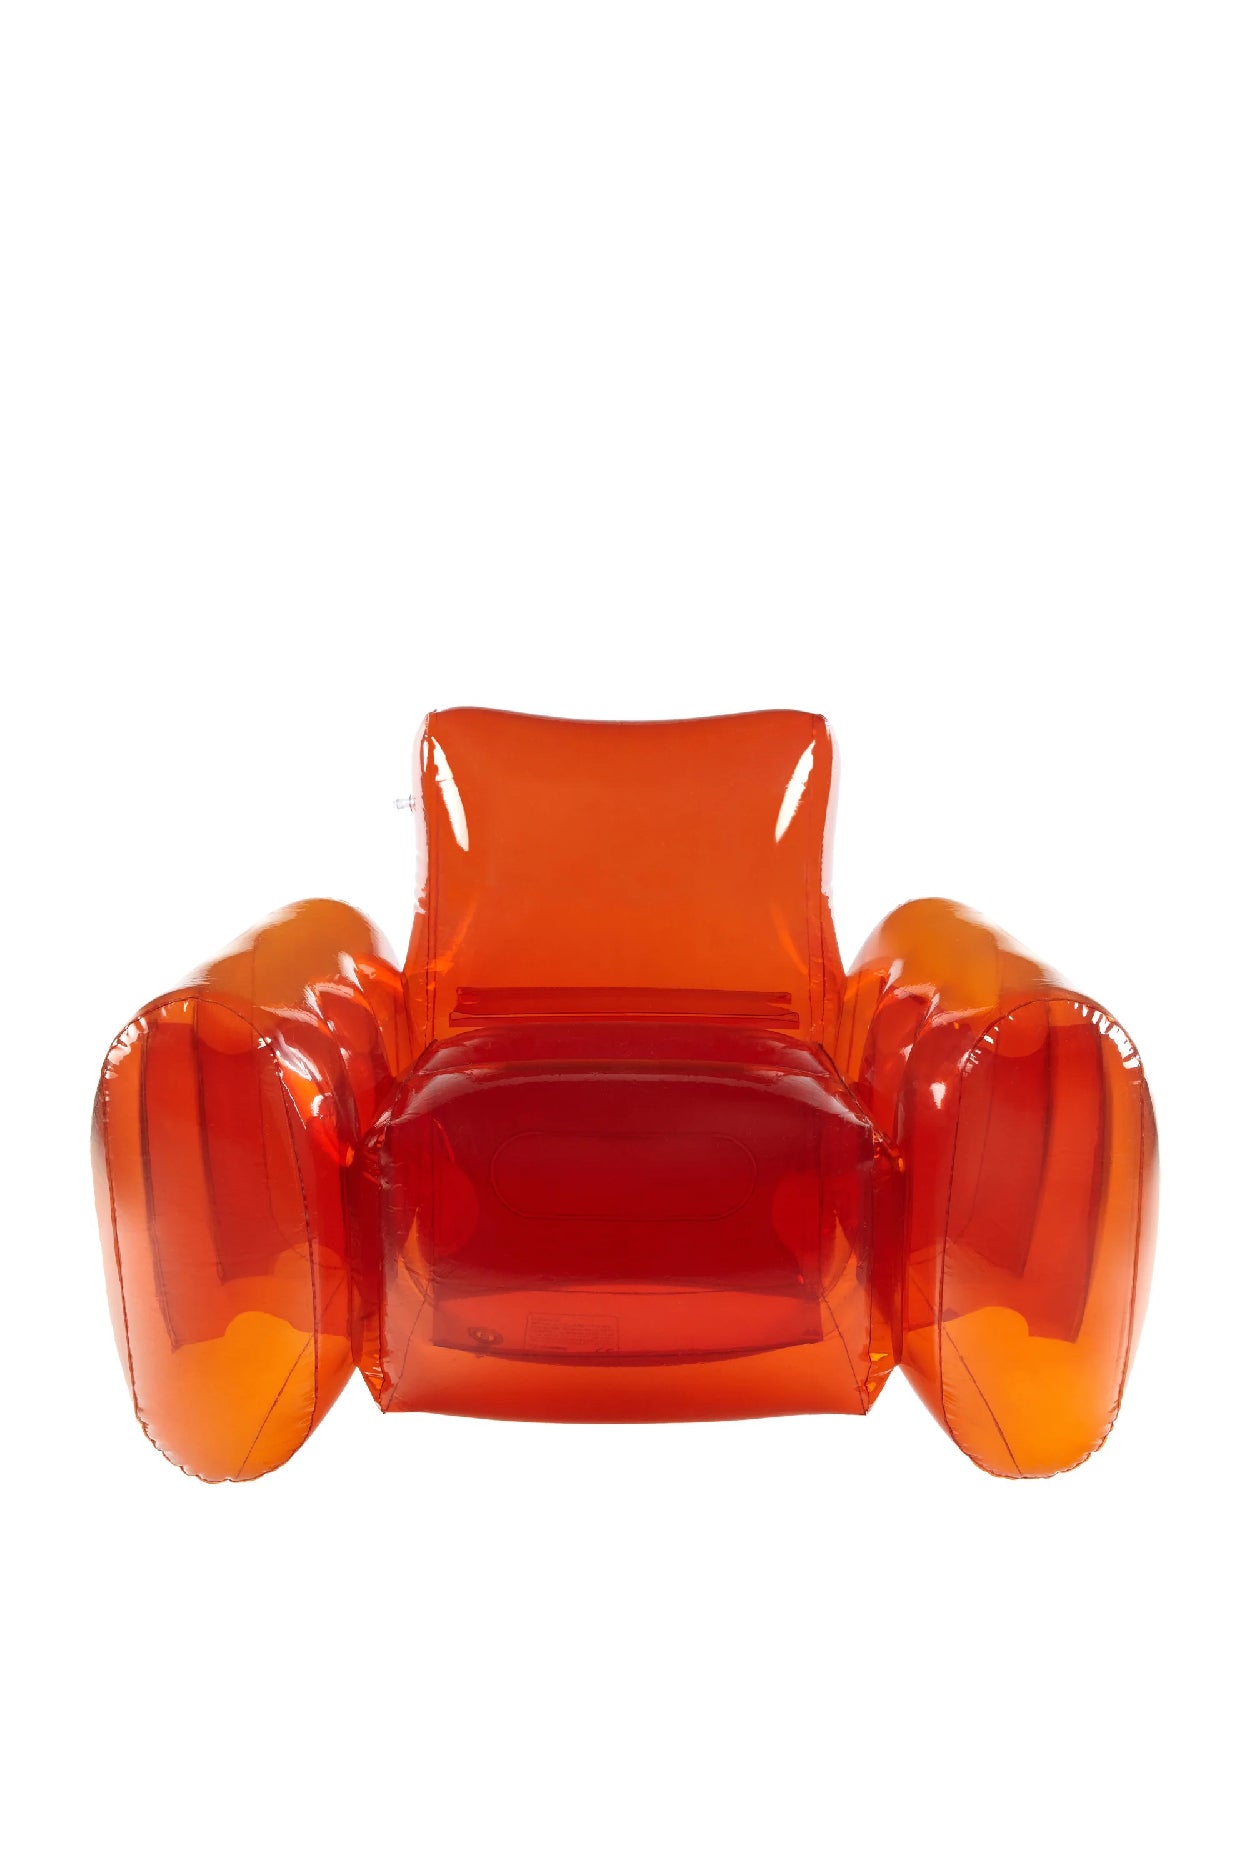 Inflatable Ego Chair